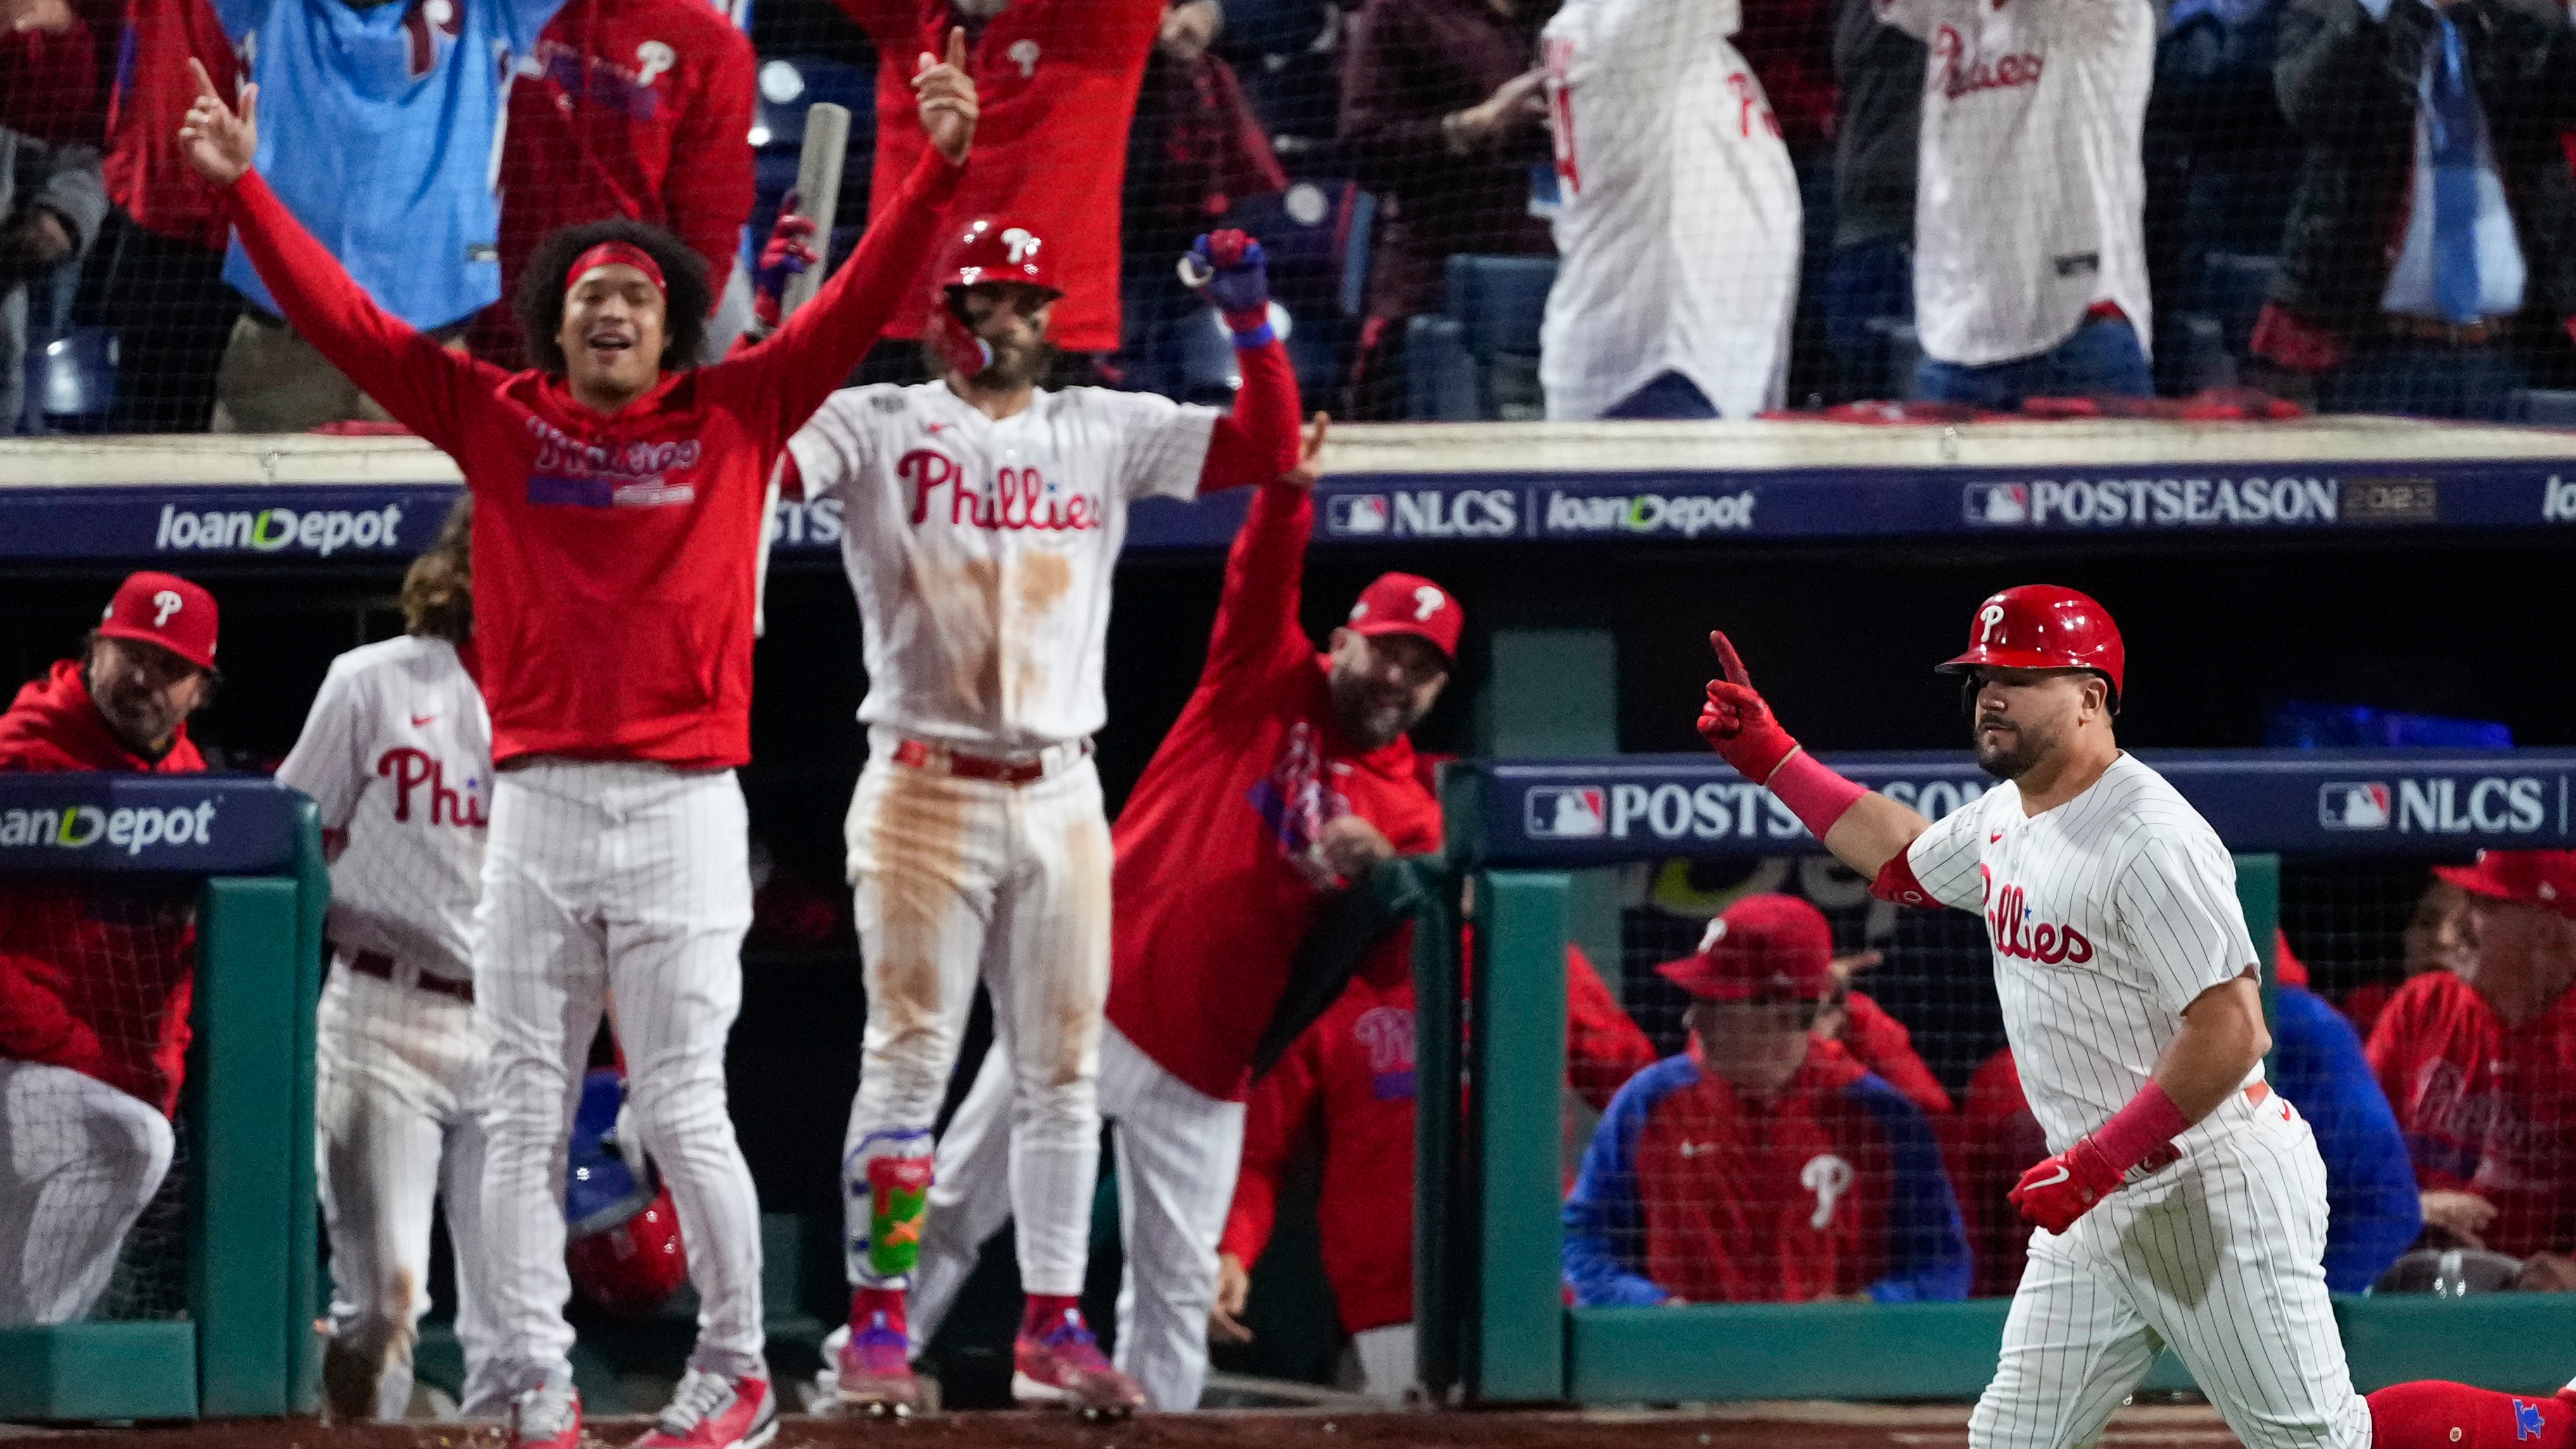 Phillies rookie rubs it in Braves faces after NLDS win 